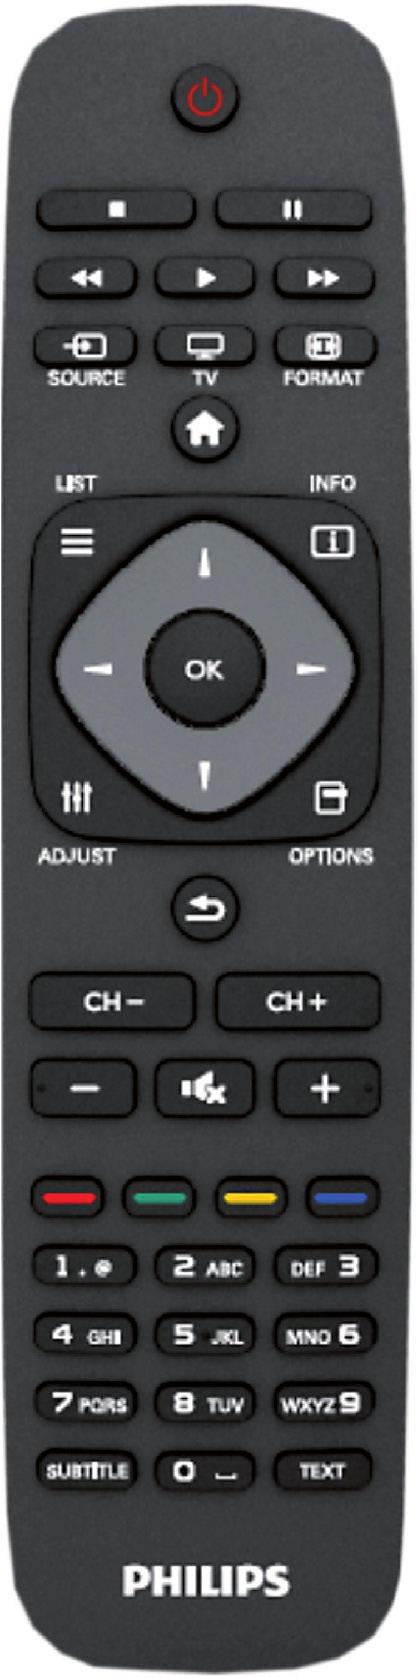 Viewing remote control 1. Standby 2. Stop (in Media Browser mode) 3. Play (in Media Browser mode) / Play-Slideshow (in Media Browser) 4. Rapid reverse (in Media Browser mode) 5.